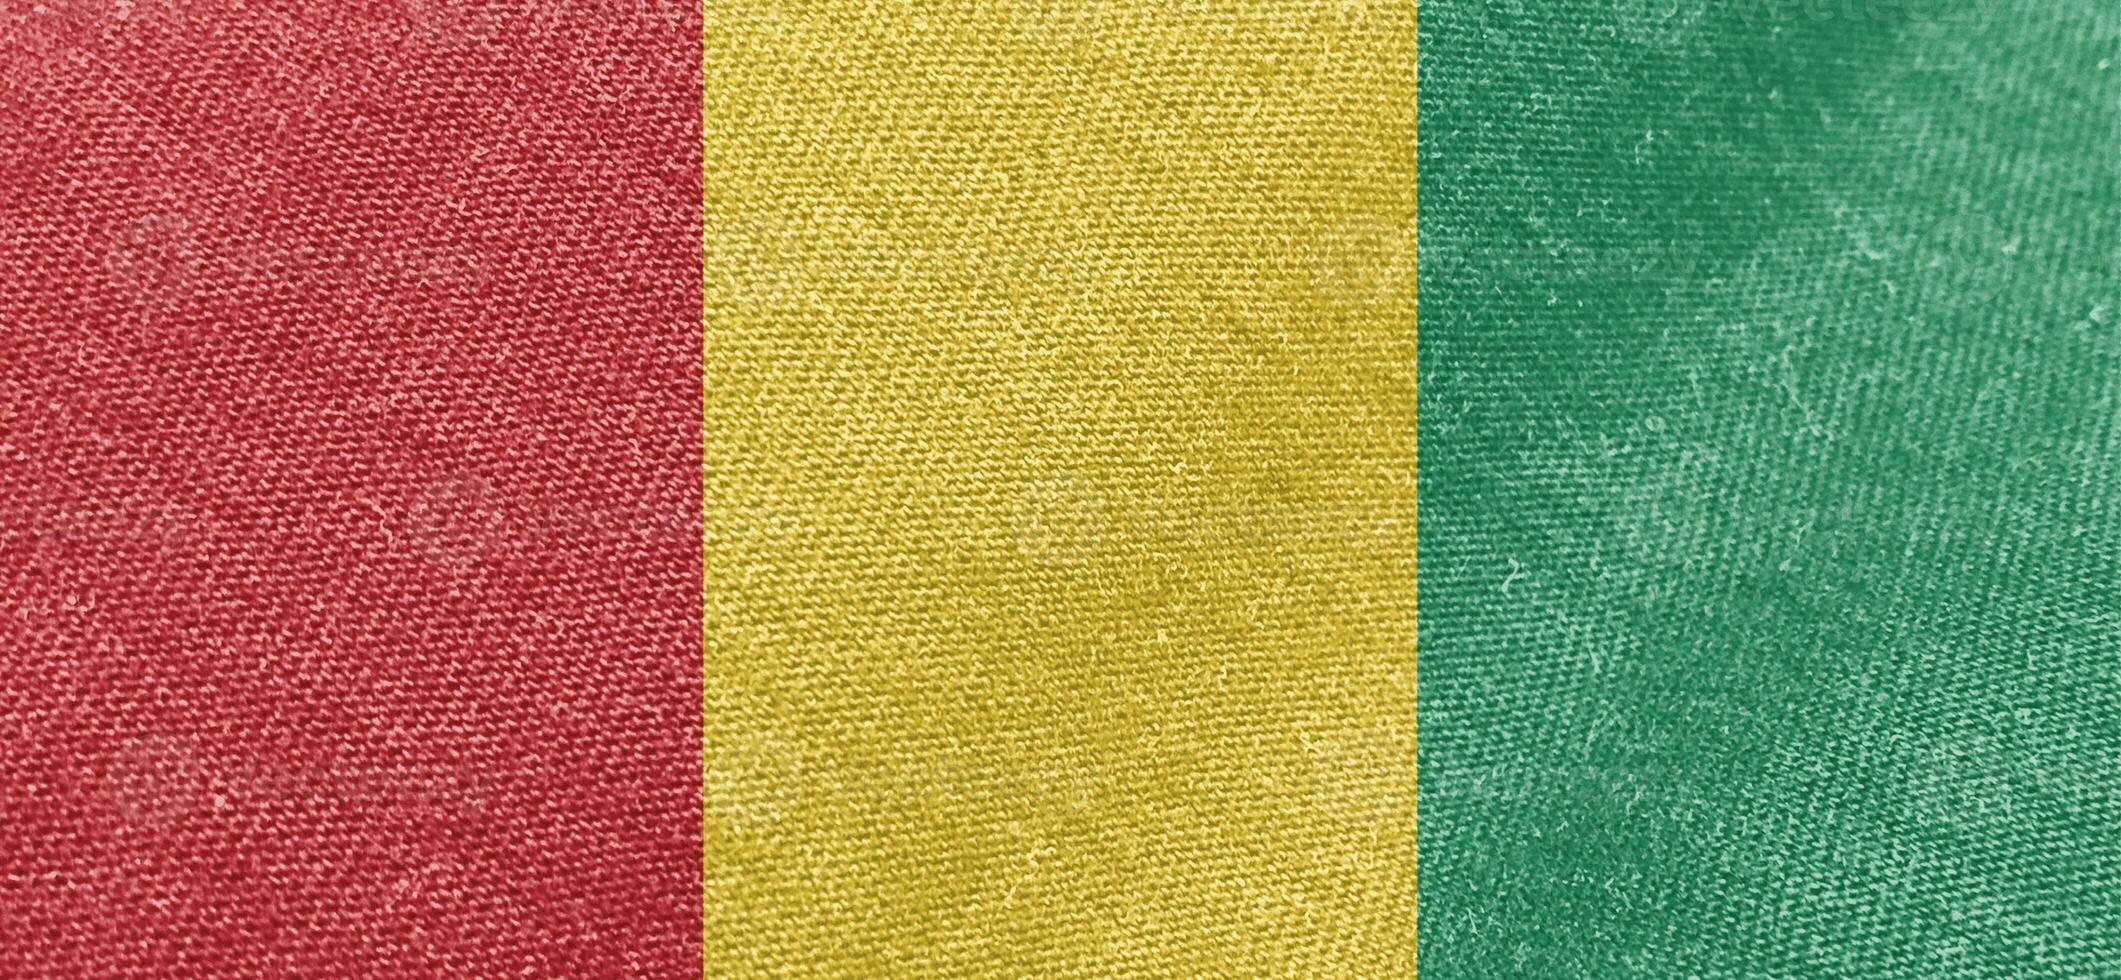 Guinea fabric flag cotton material wide flags wallpaper colored fabric Guinea flag background photo